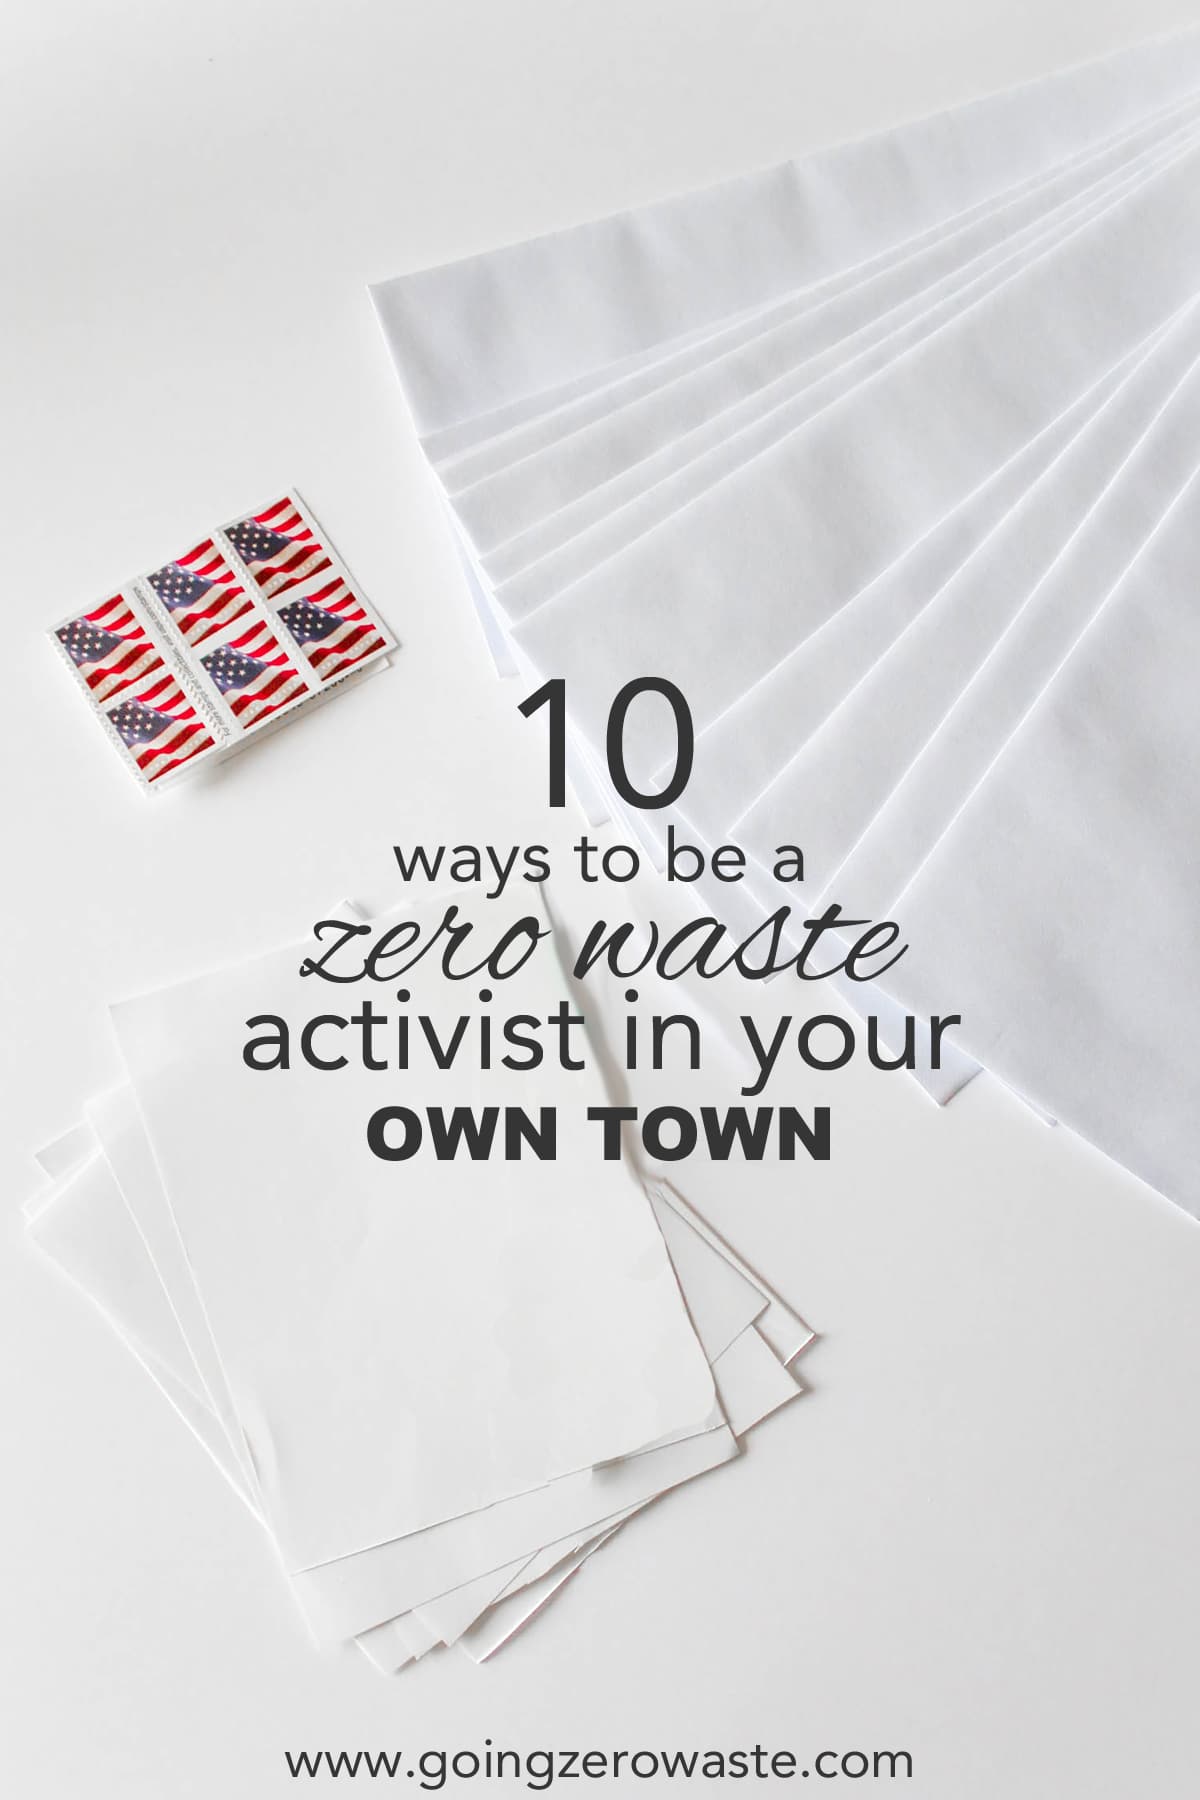 10 Ways to Be a Zero Waste Activist in Your Town